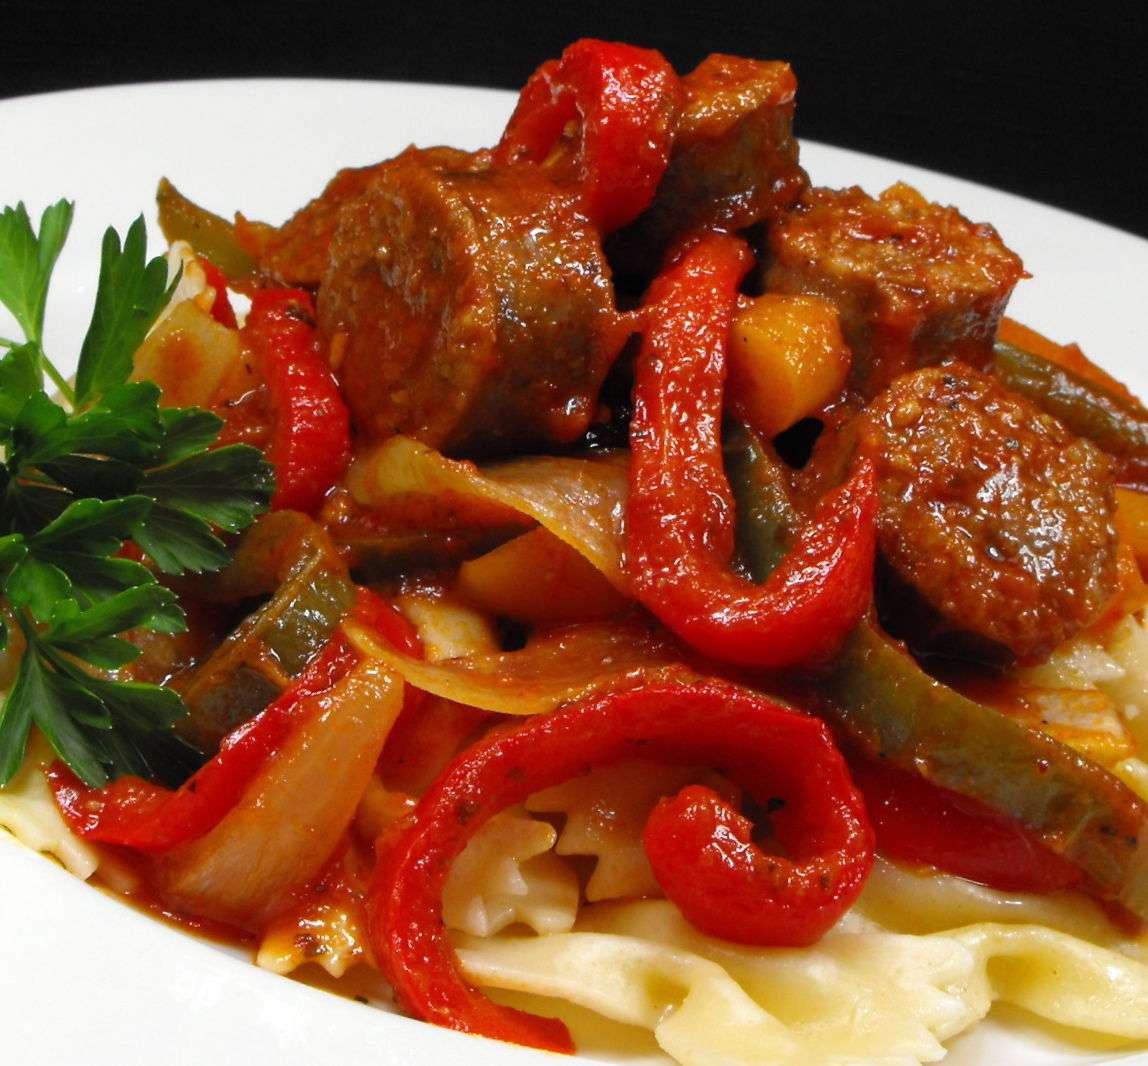 a colorful bowl of sliced sausage, red bell pepper, and onion over pasta, garnished with Italian parsley